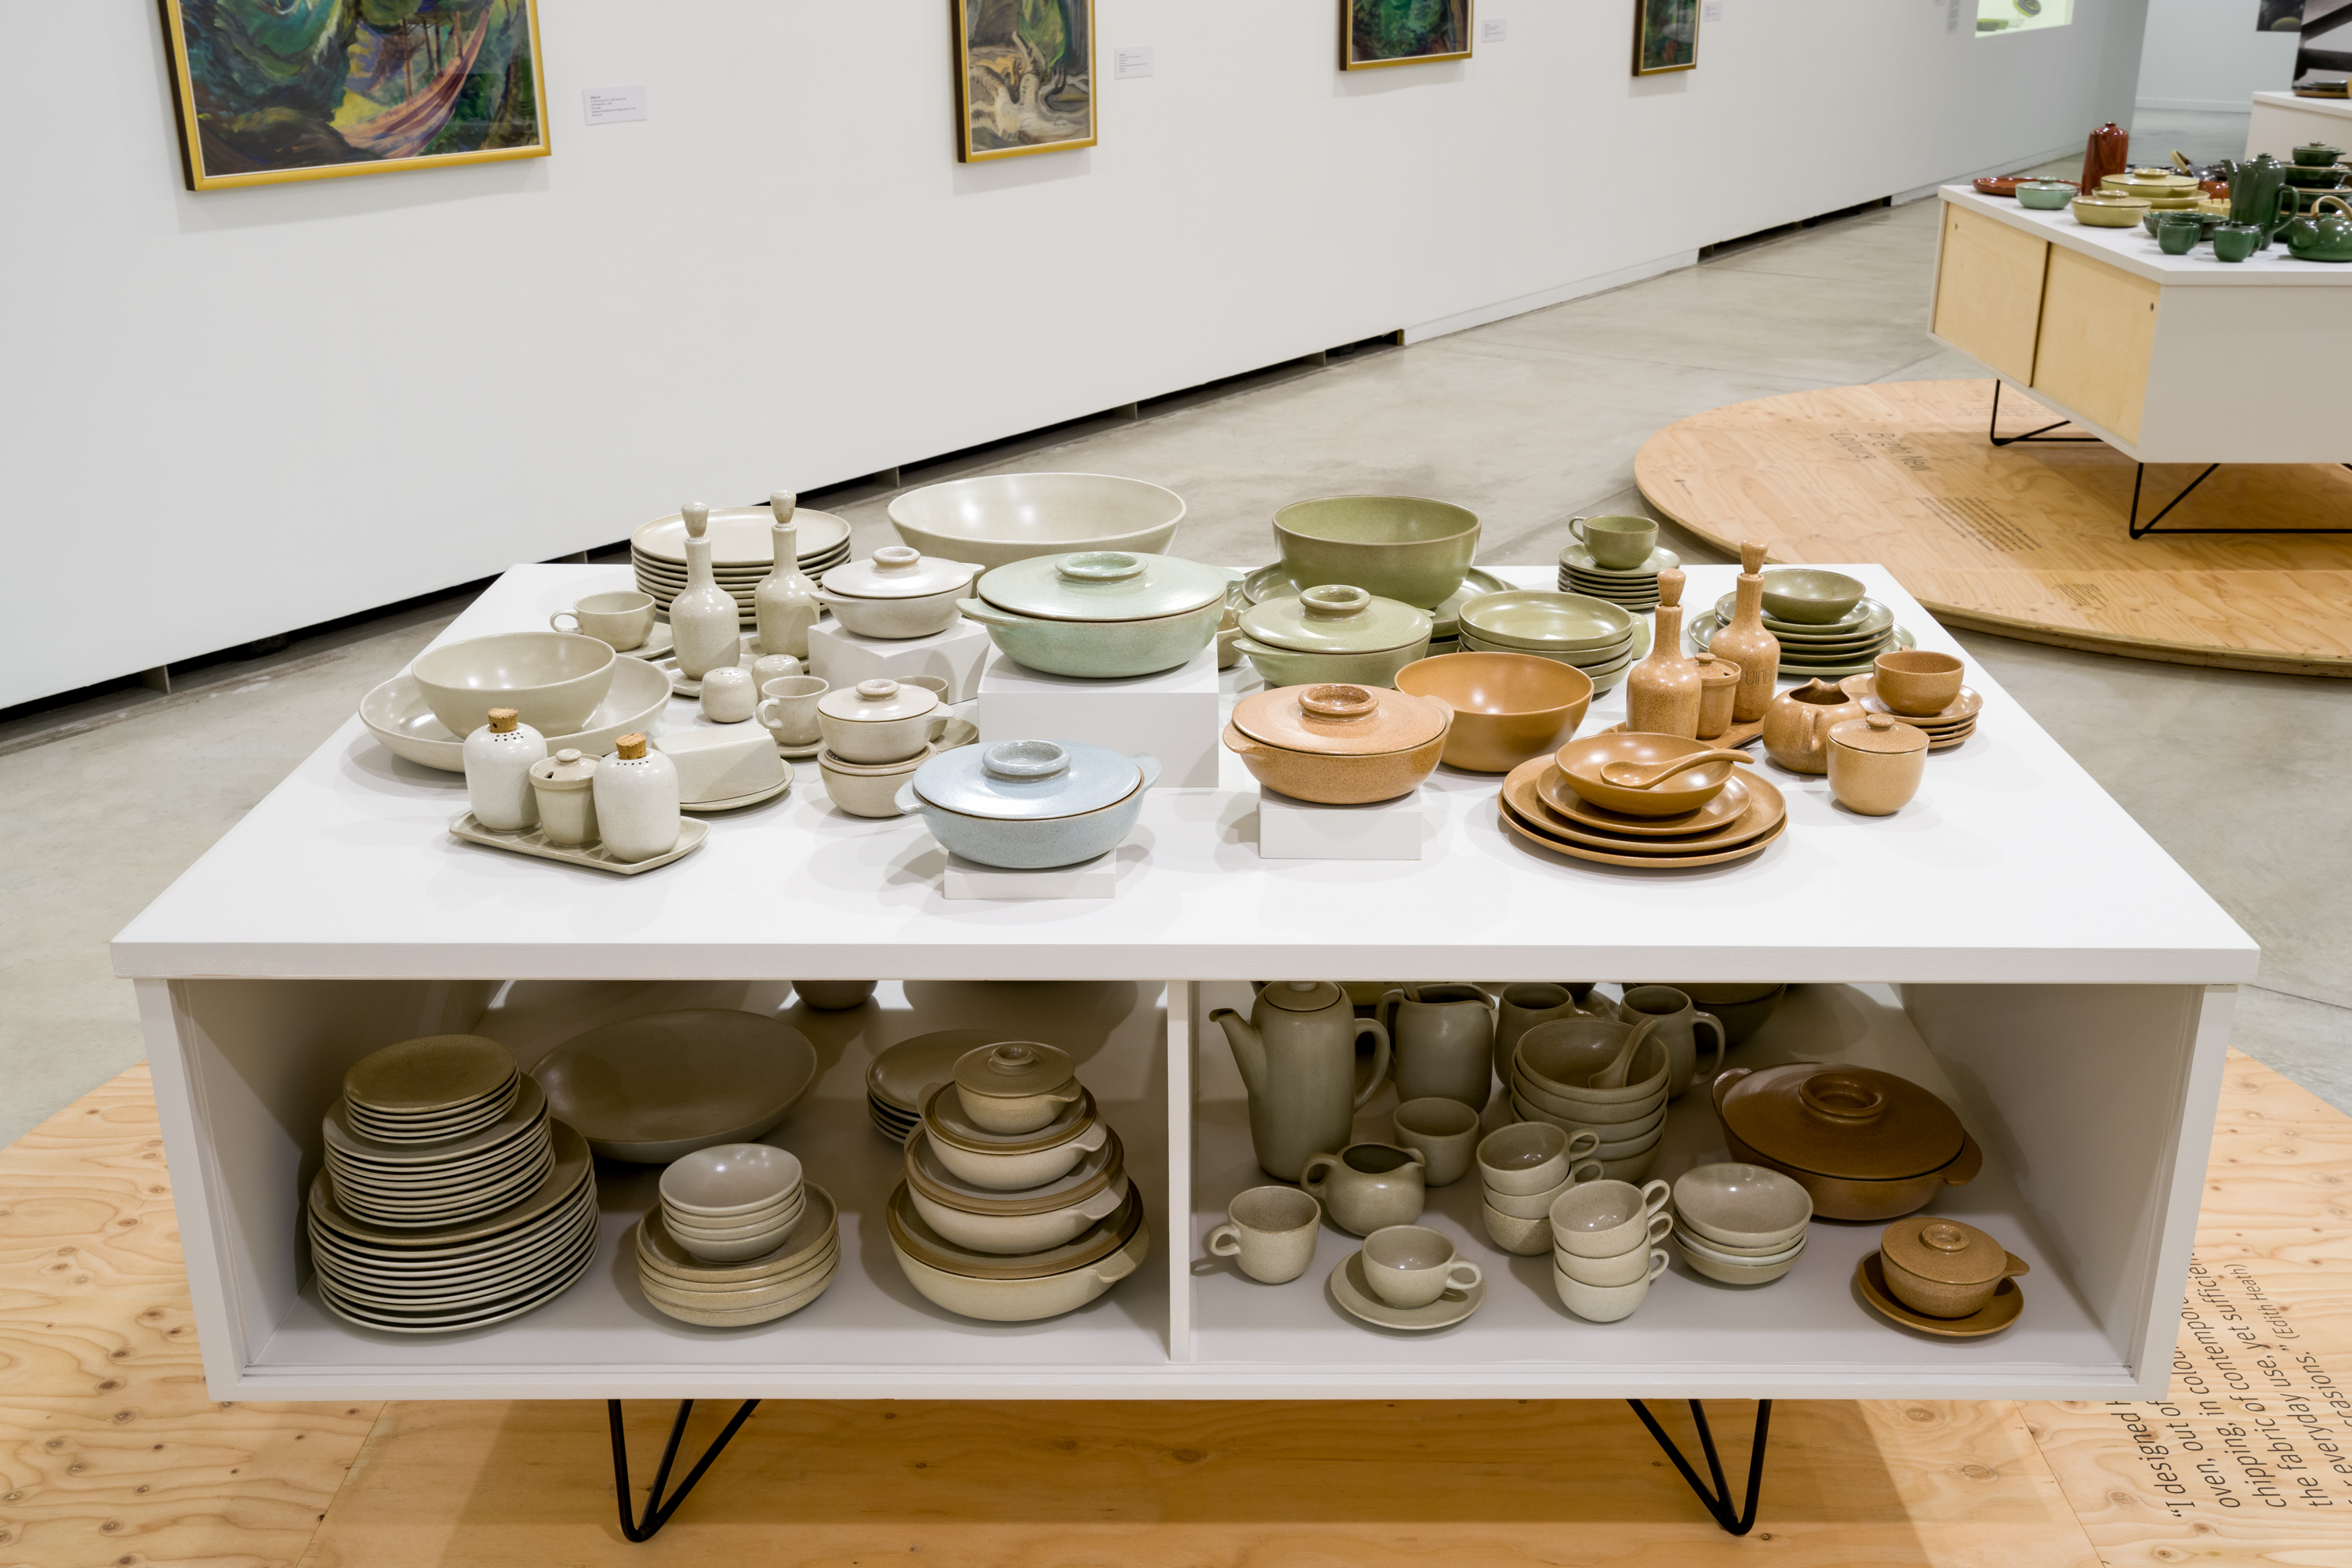 Photograph of an open Conover cabinet holding light coloured ceramic dinnerware.